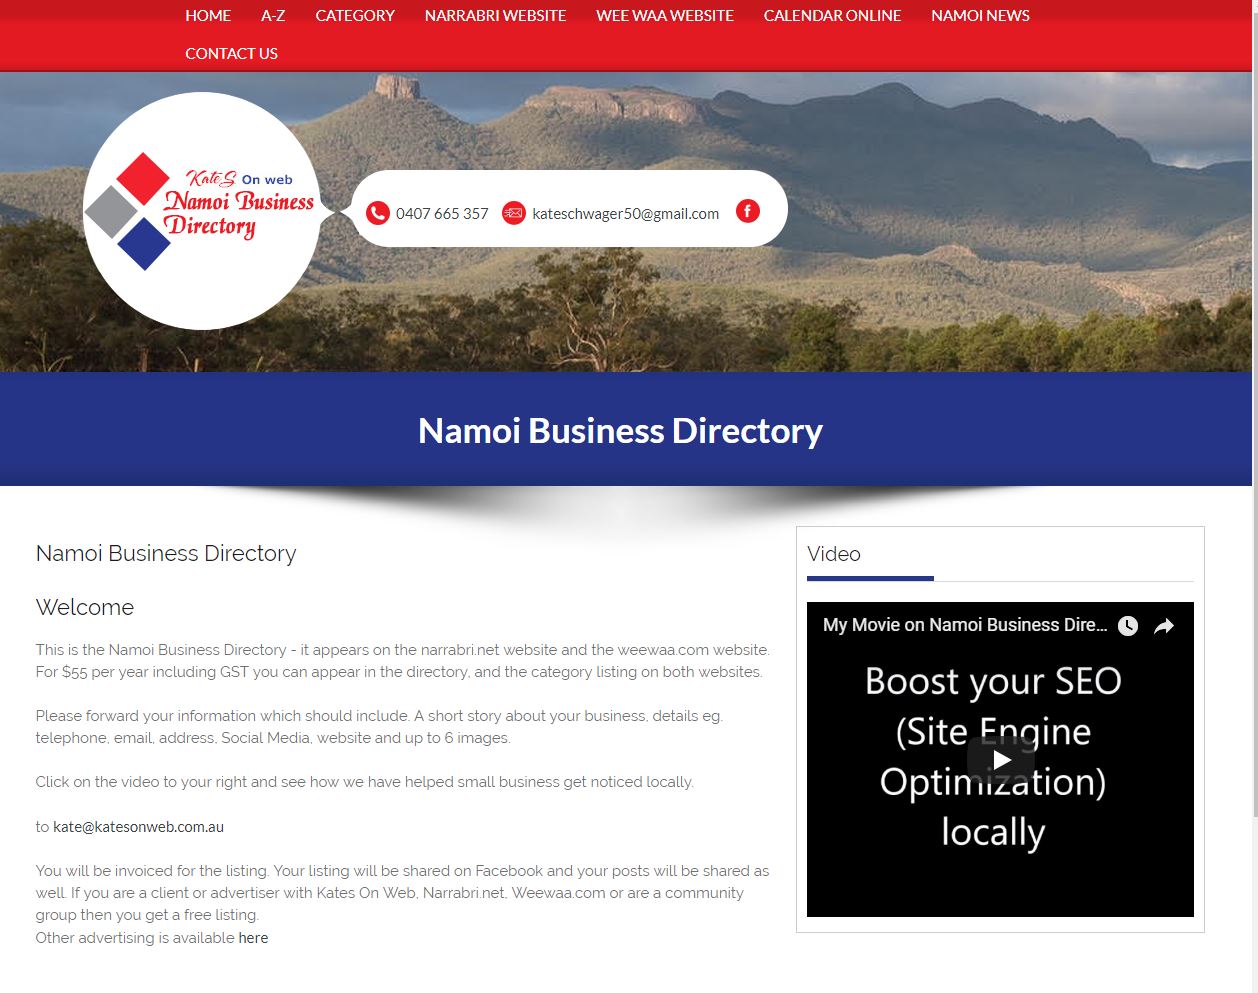 Namoi Business Directory